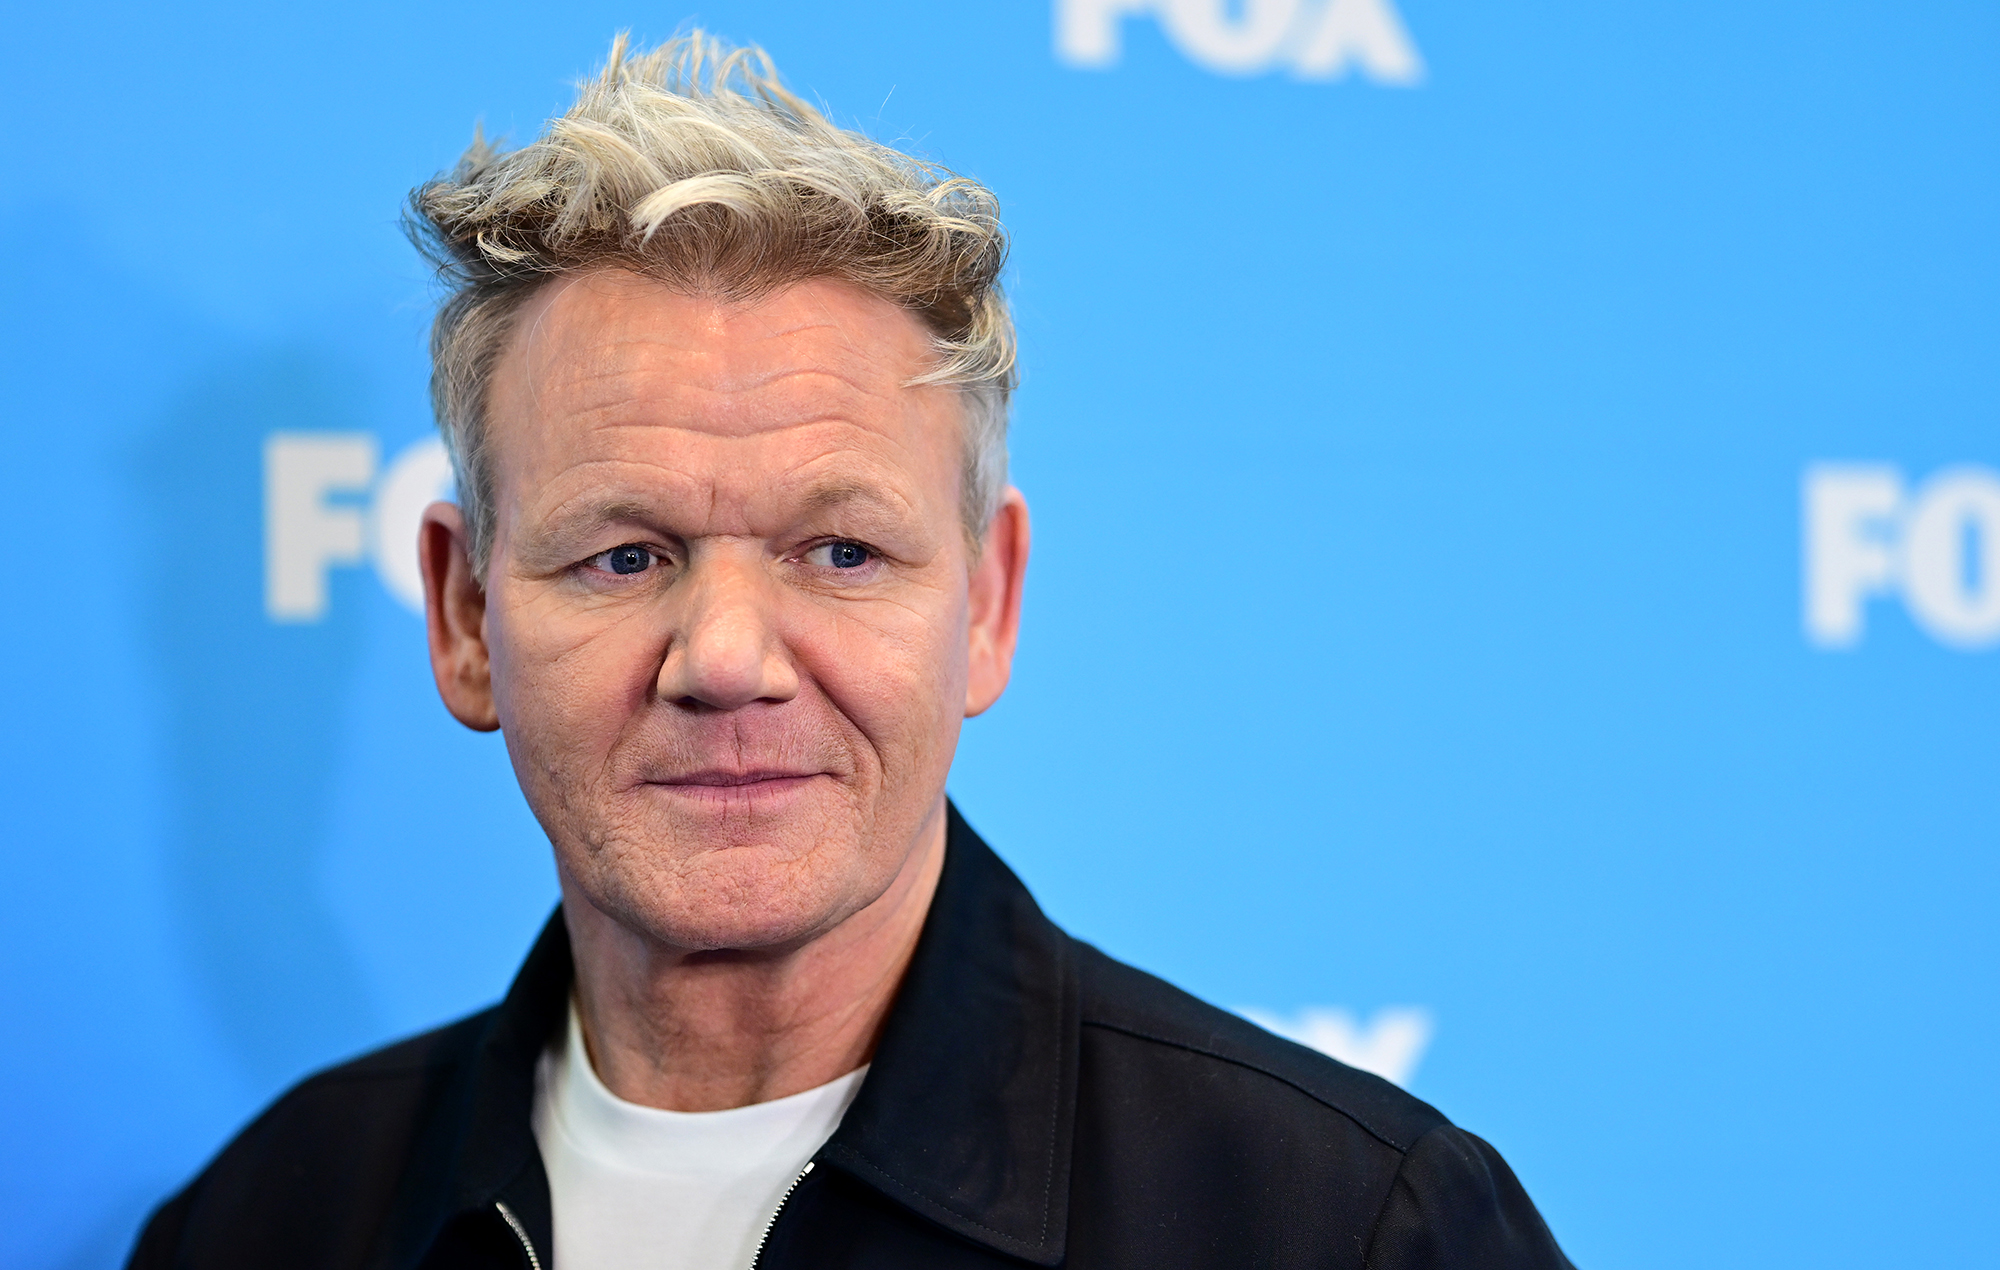 Gordon Ramsay “lucky to be alive” after bicycle accident